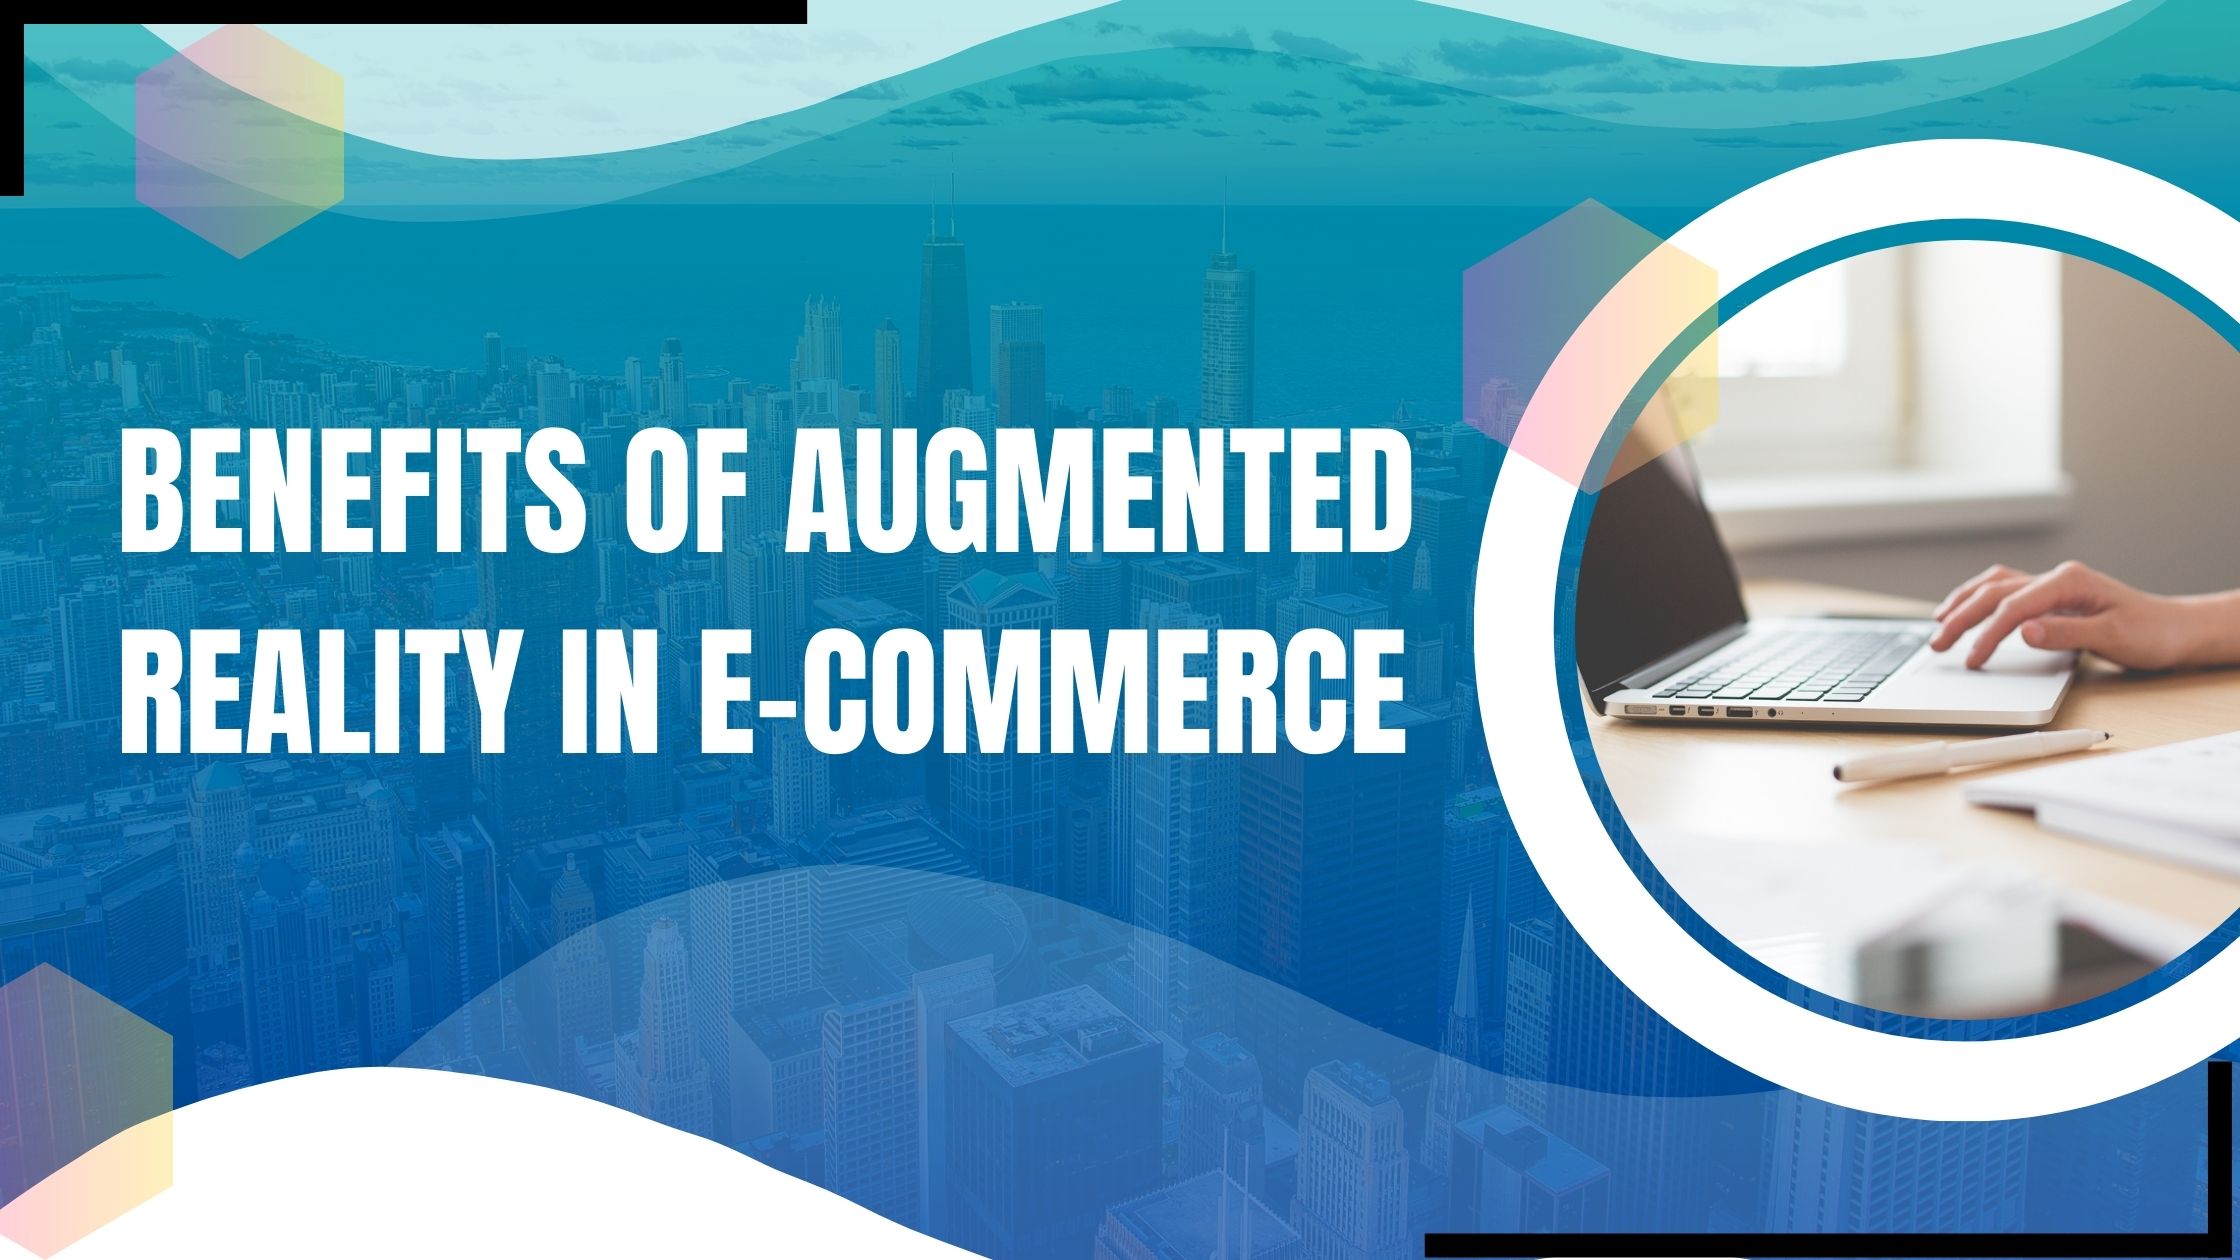 Benefits of Augmented Reality in E-commerce